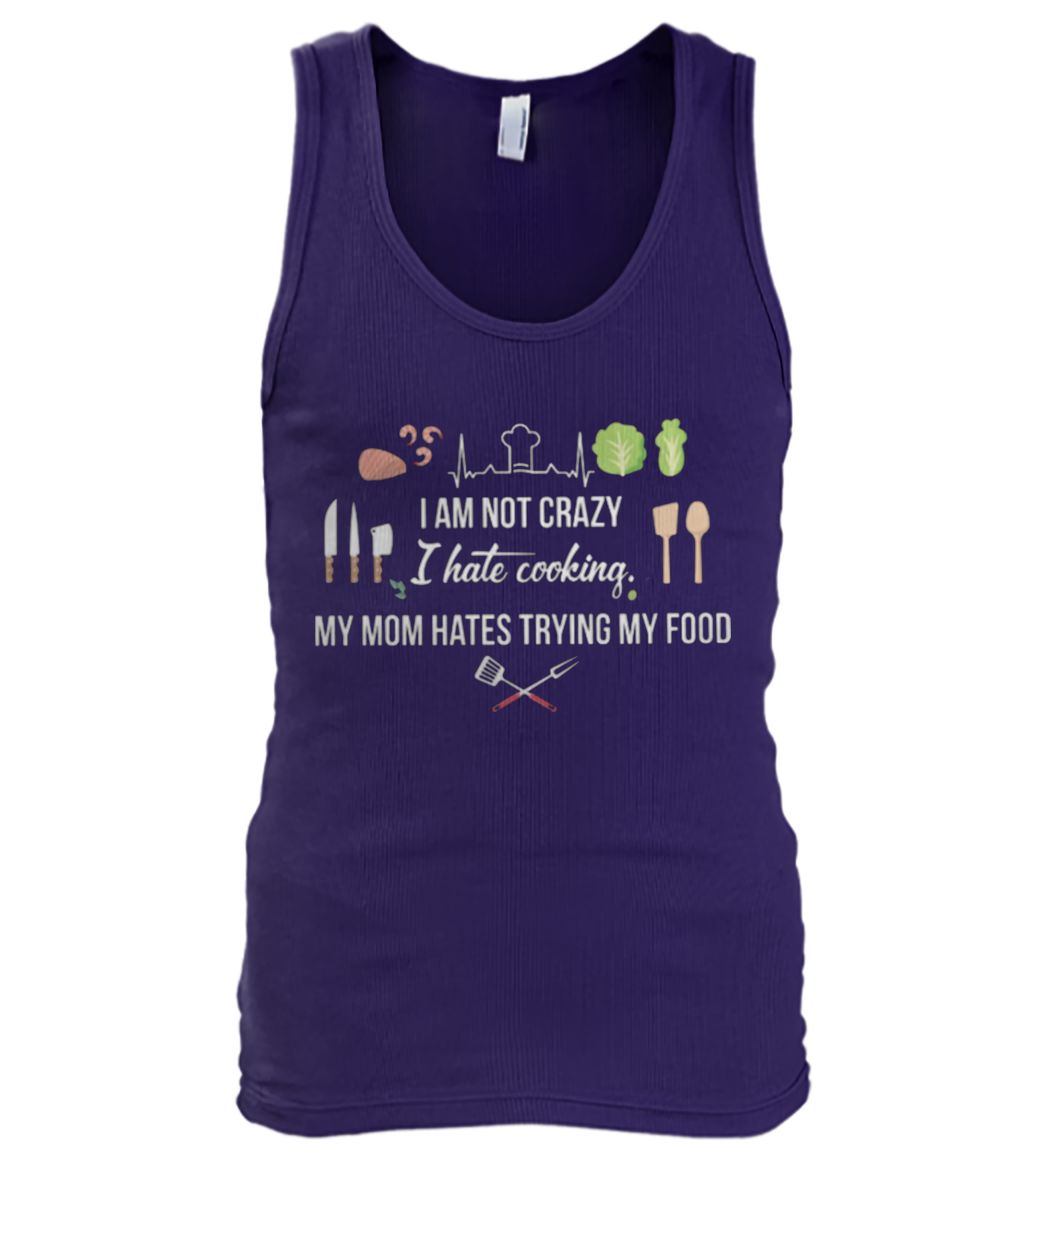 I am not crazy I hate cooking my mom hate trying my food tank top